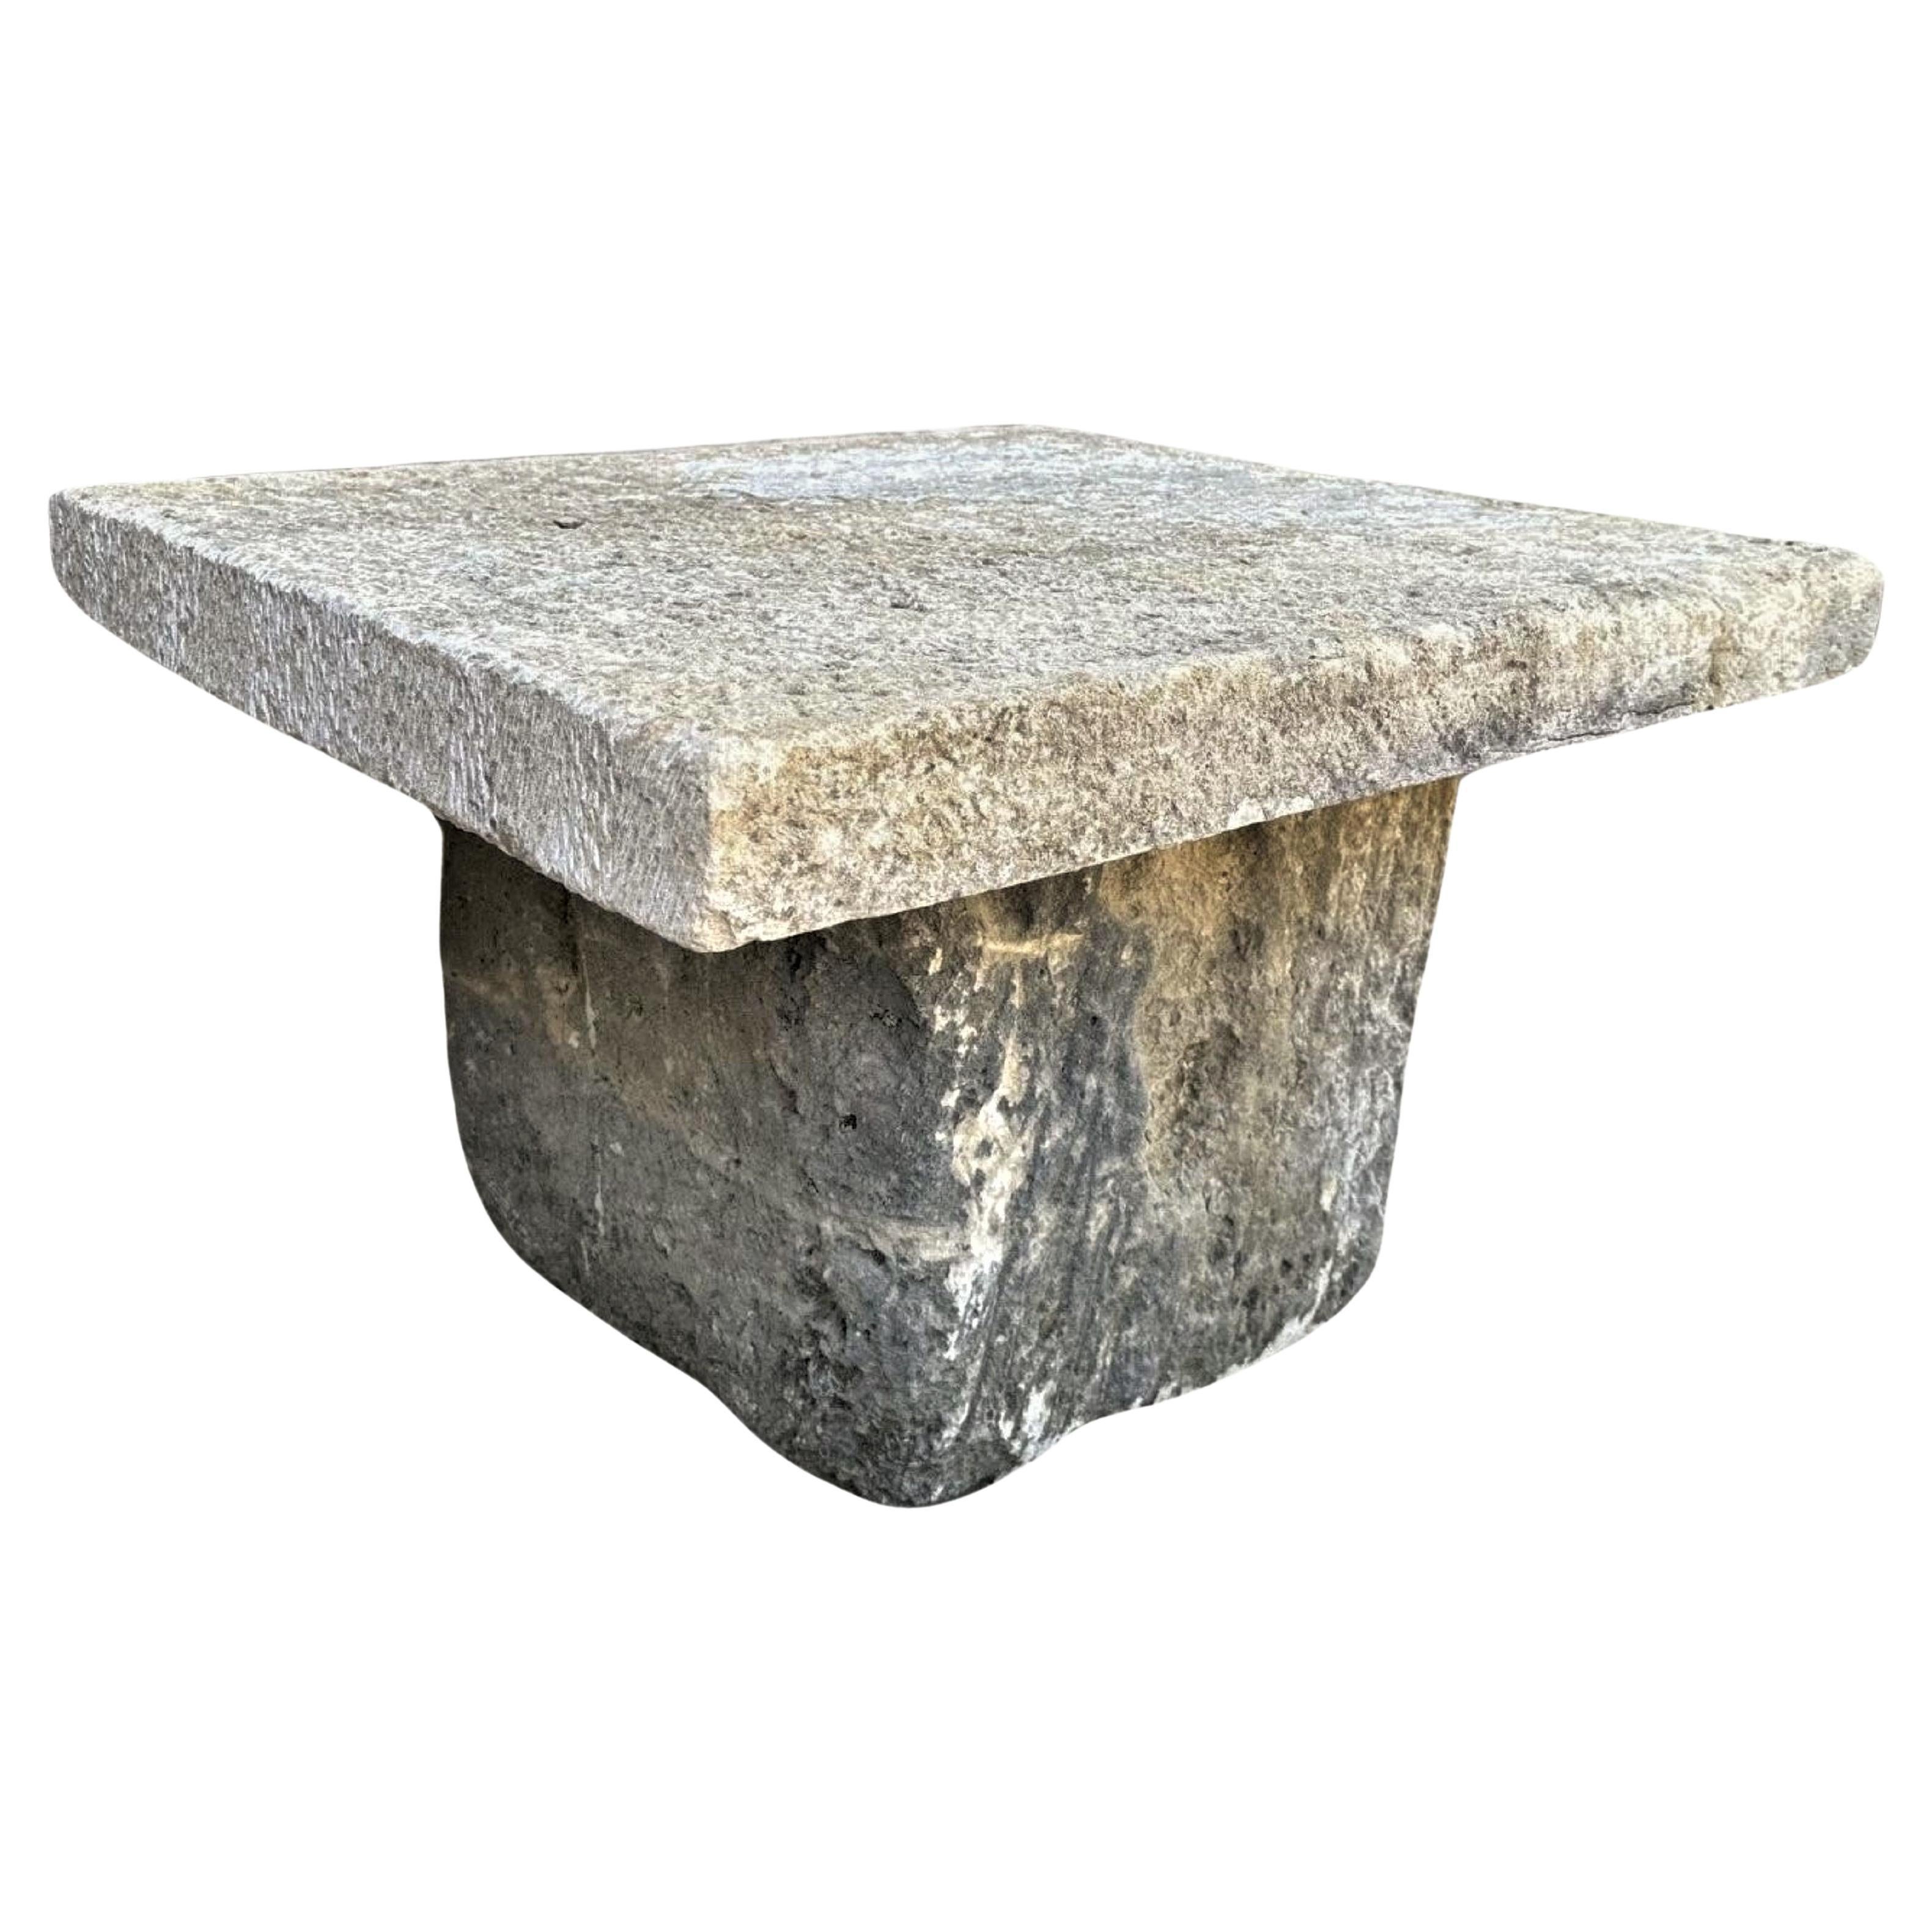 Rustic Hand Carved Stone Garden Coffee Farm Patio Table Outdoor Indoor Antique For Sale